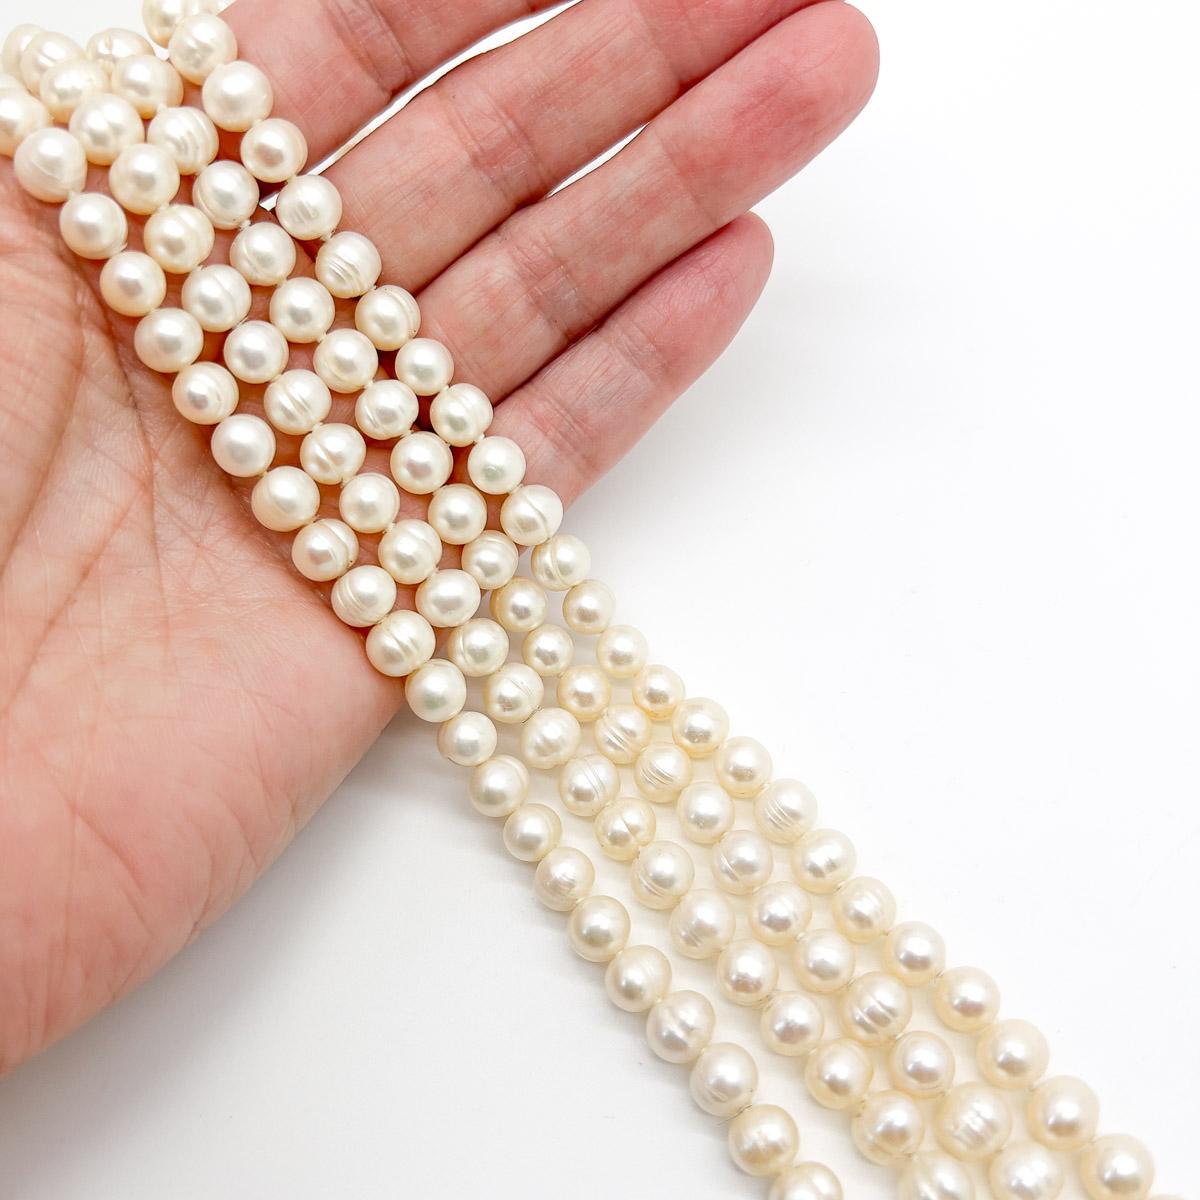 A fabulously long Vintage Freshwater Pearl Necklace. The perfect style staple.
An unsigned beauty. A rare treasure. Just because a jewel doesn’t carry a designer name, doesn’t mean it isn't coveted. The unsigned beauties in our collection are